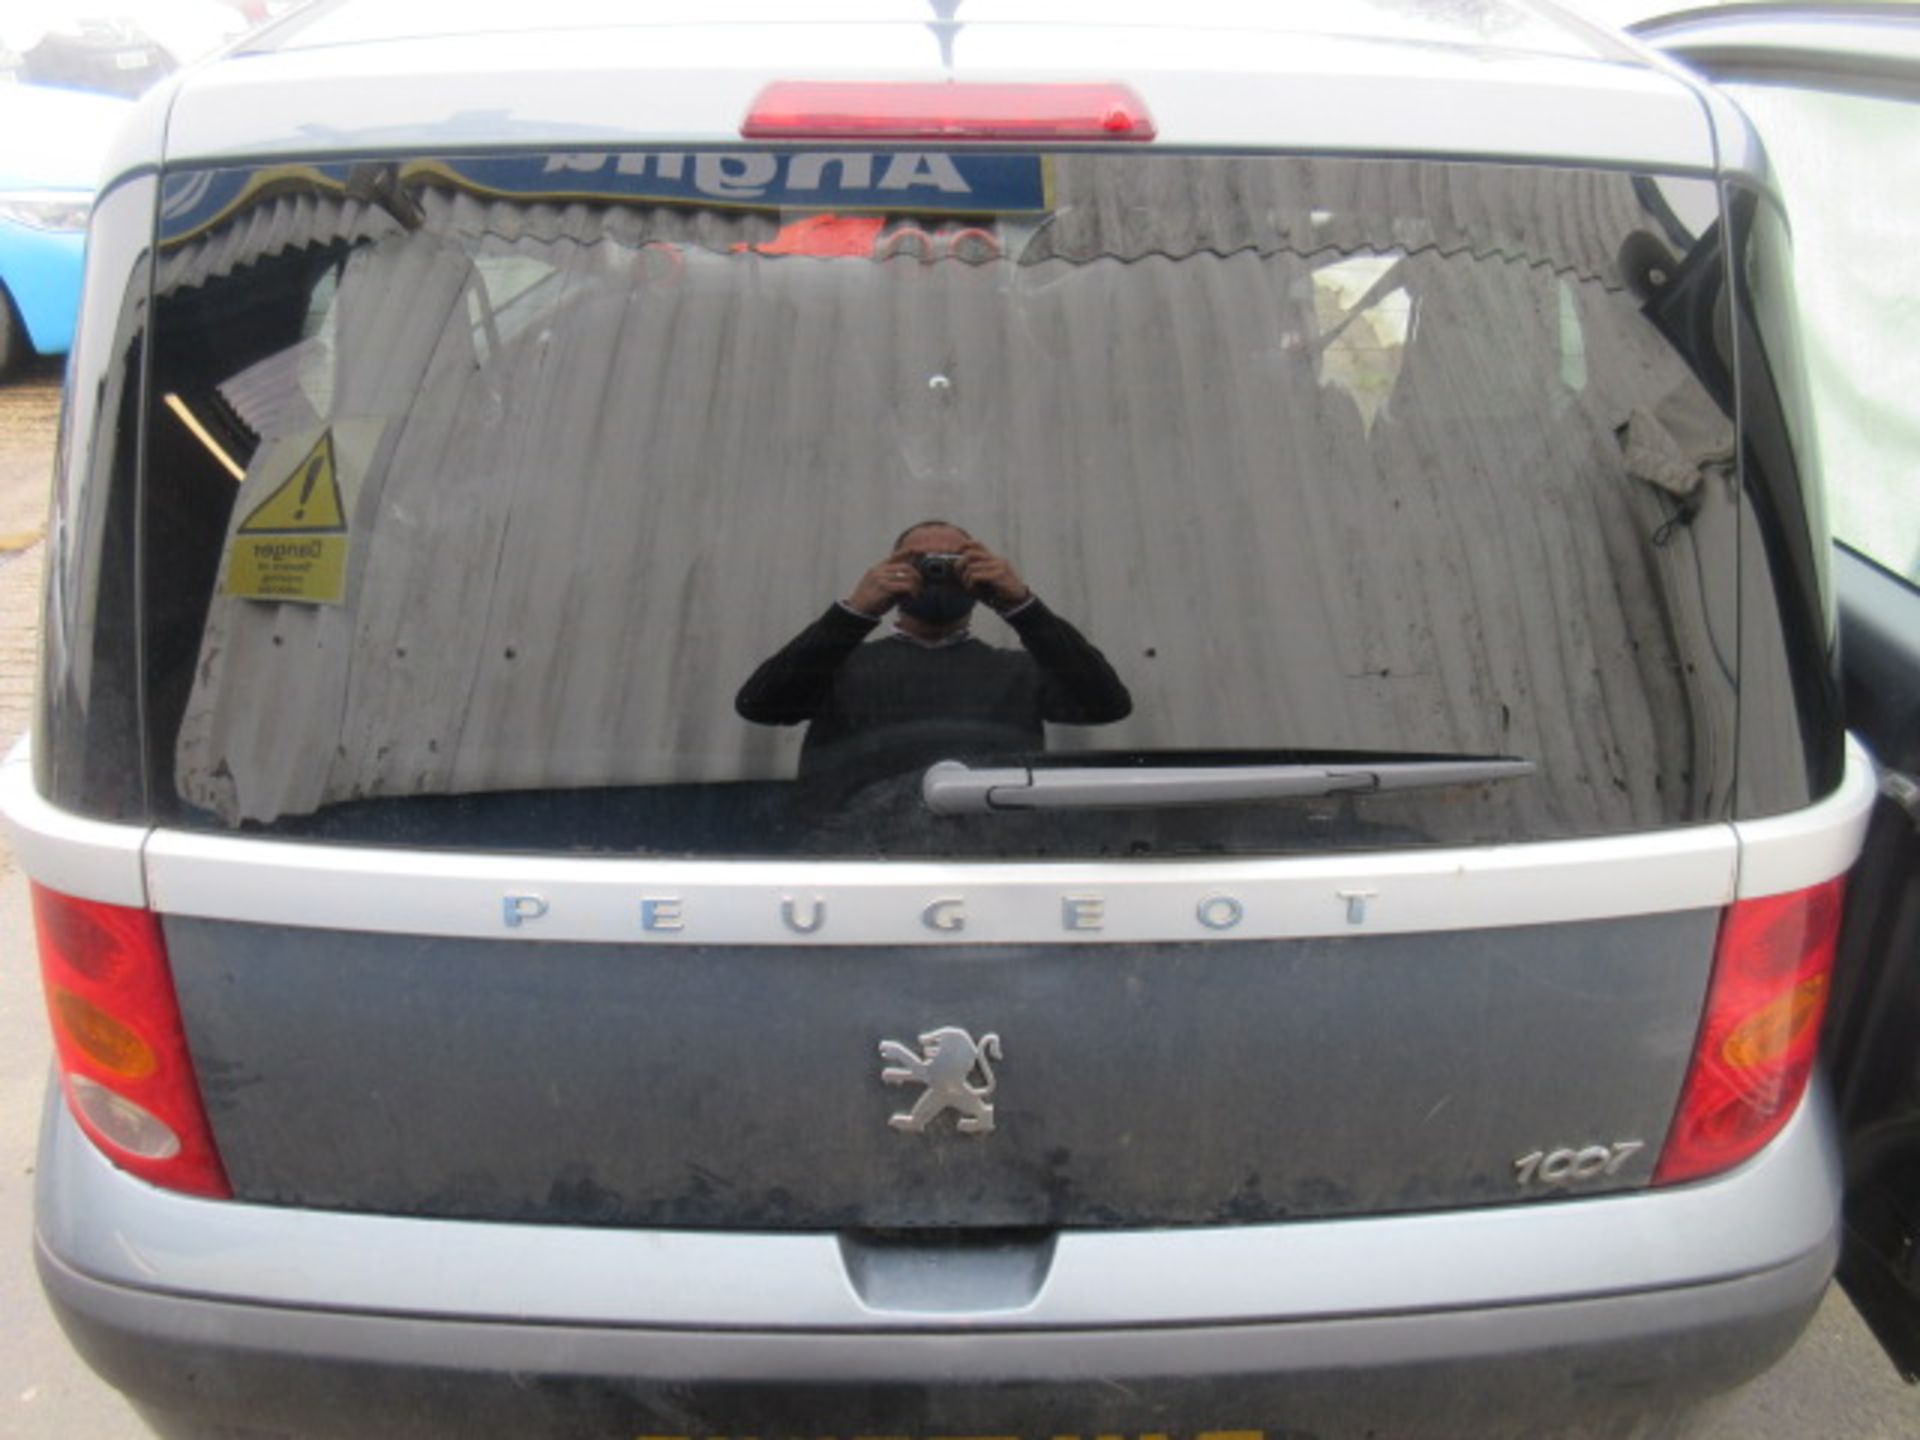 55 05 Peugeot 1007 Dolce - Image 10 of 22